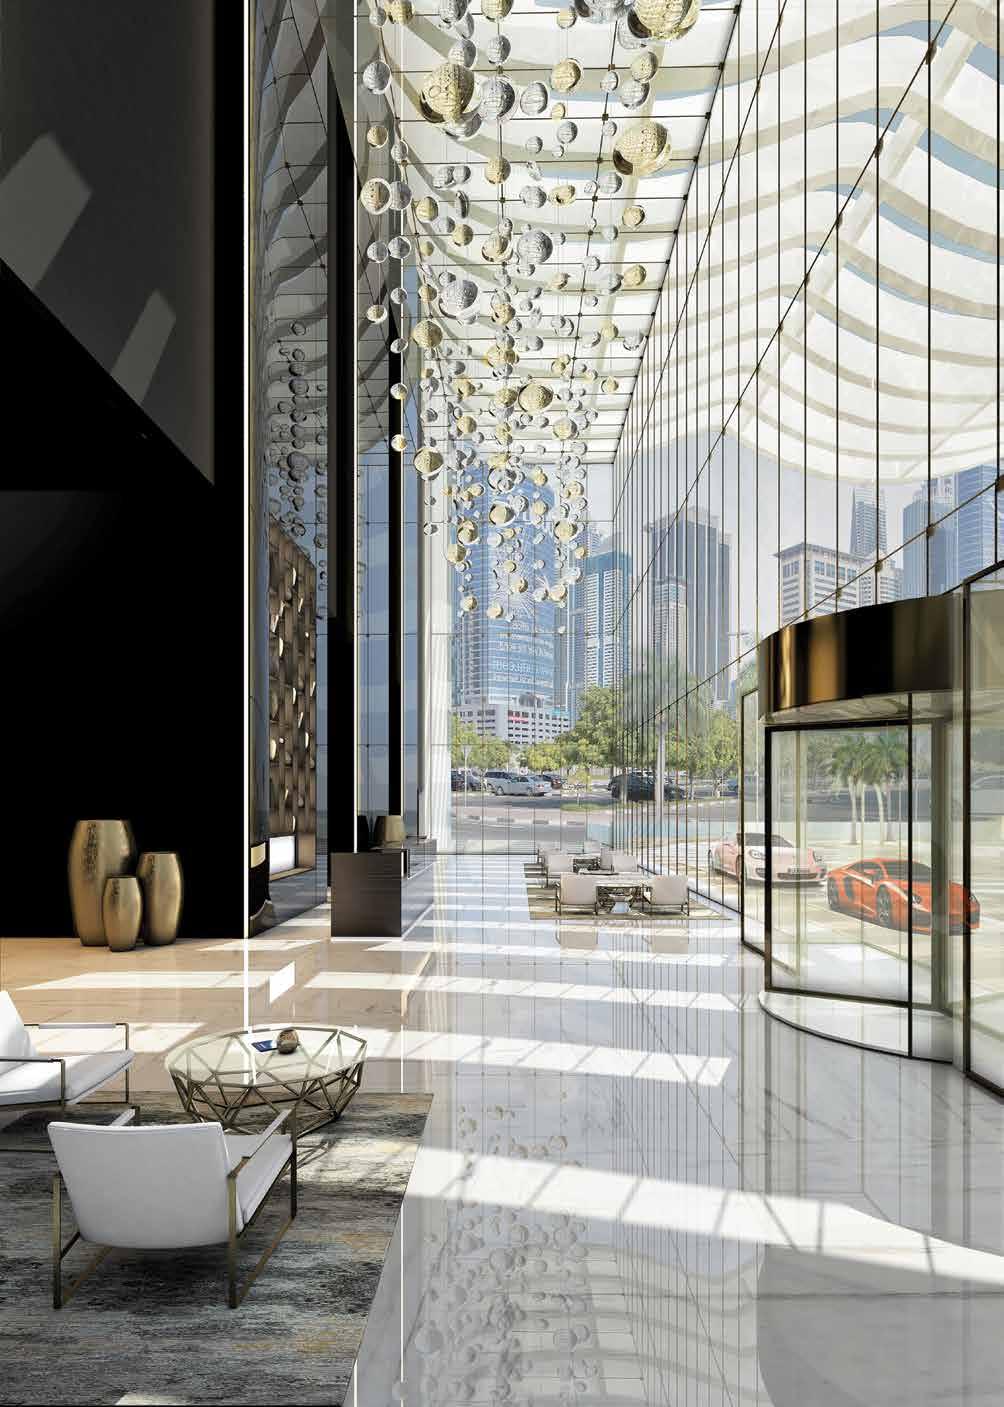 A LOBBY THAT S A CLASS APART The lobby of 1/JBR offers all the indulgence anyone could possibly imagine with a fashionable and cutting-edge design.